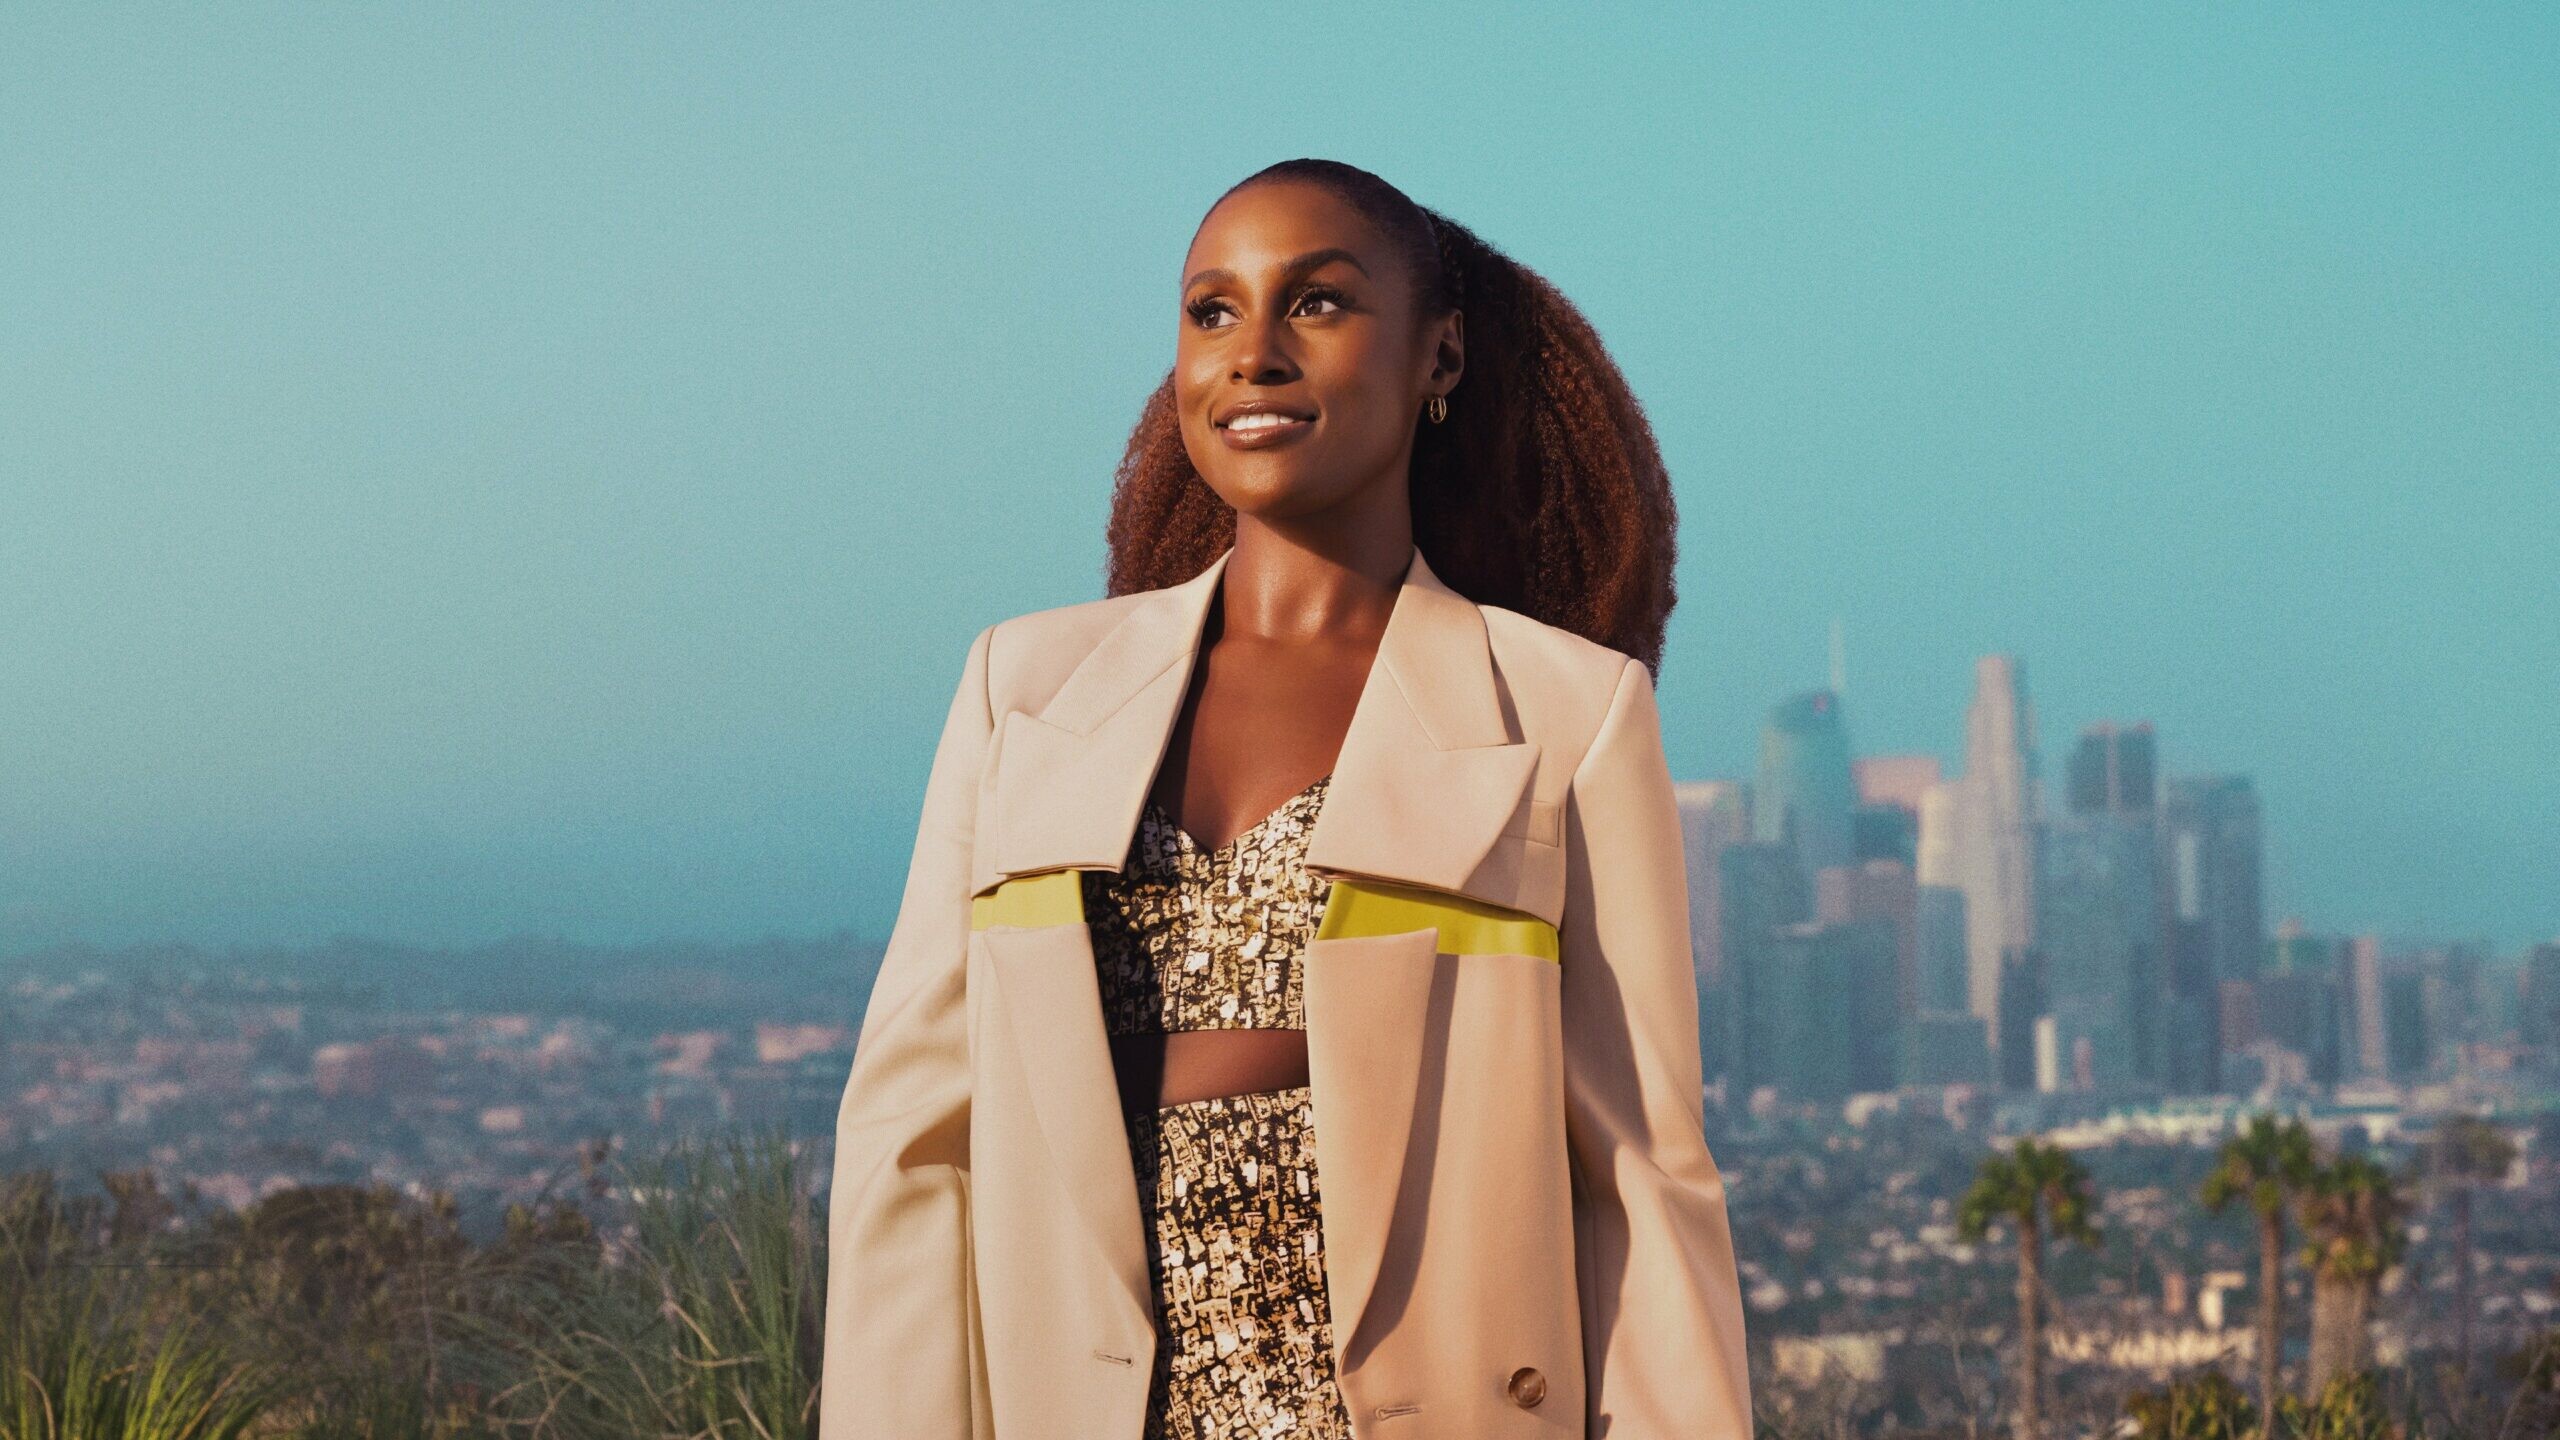 Issa Rae: Co-creator of the television series Insecure, A masterclass of music supervision, Five seasons. 2560x1440 HD Wallpaper.